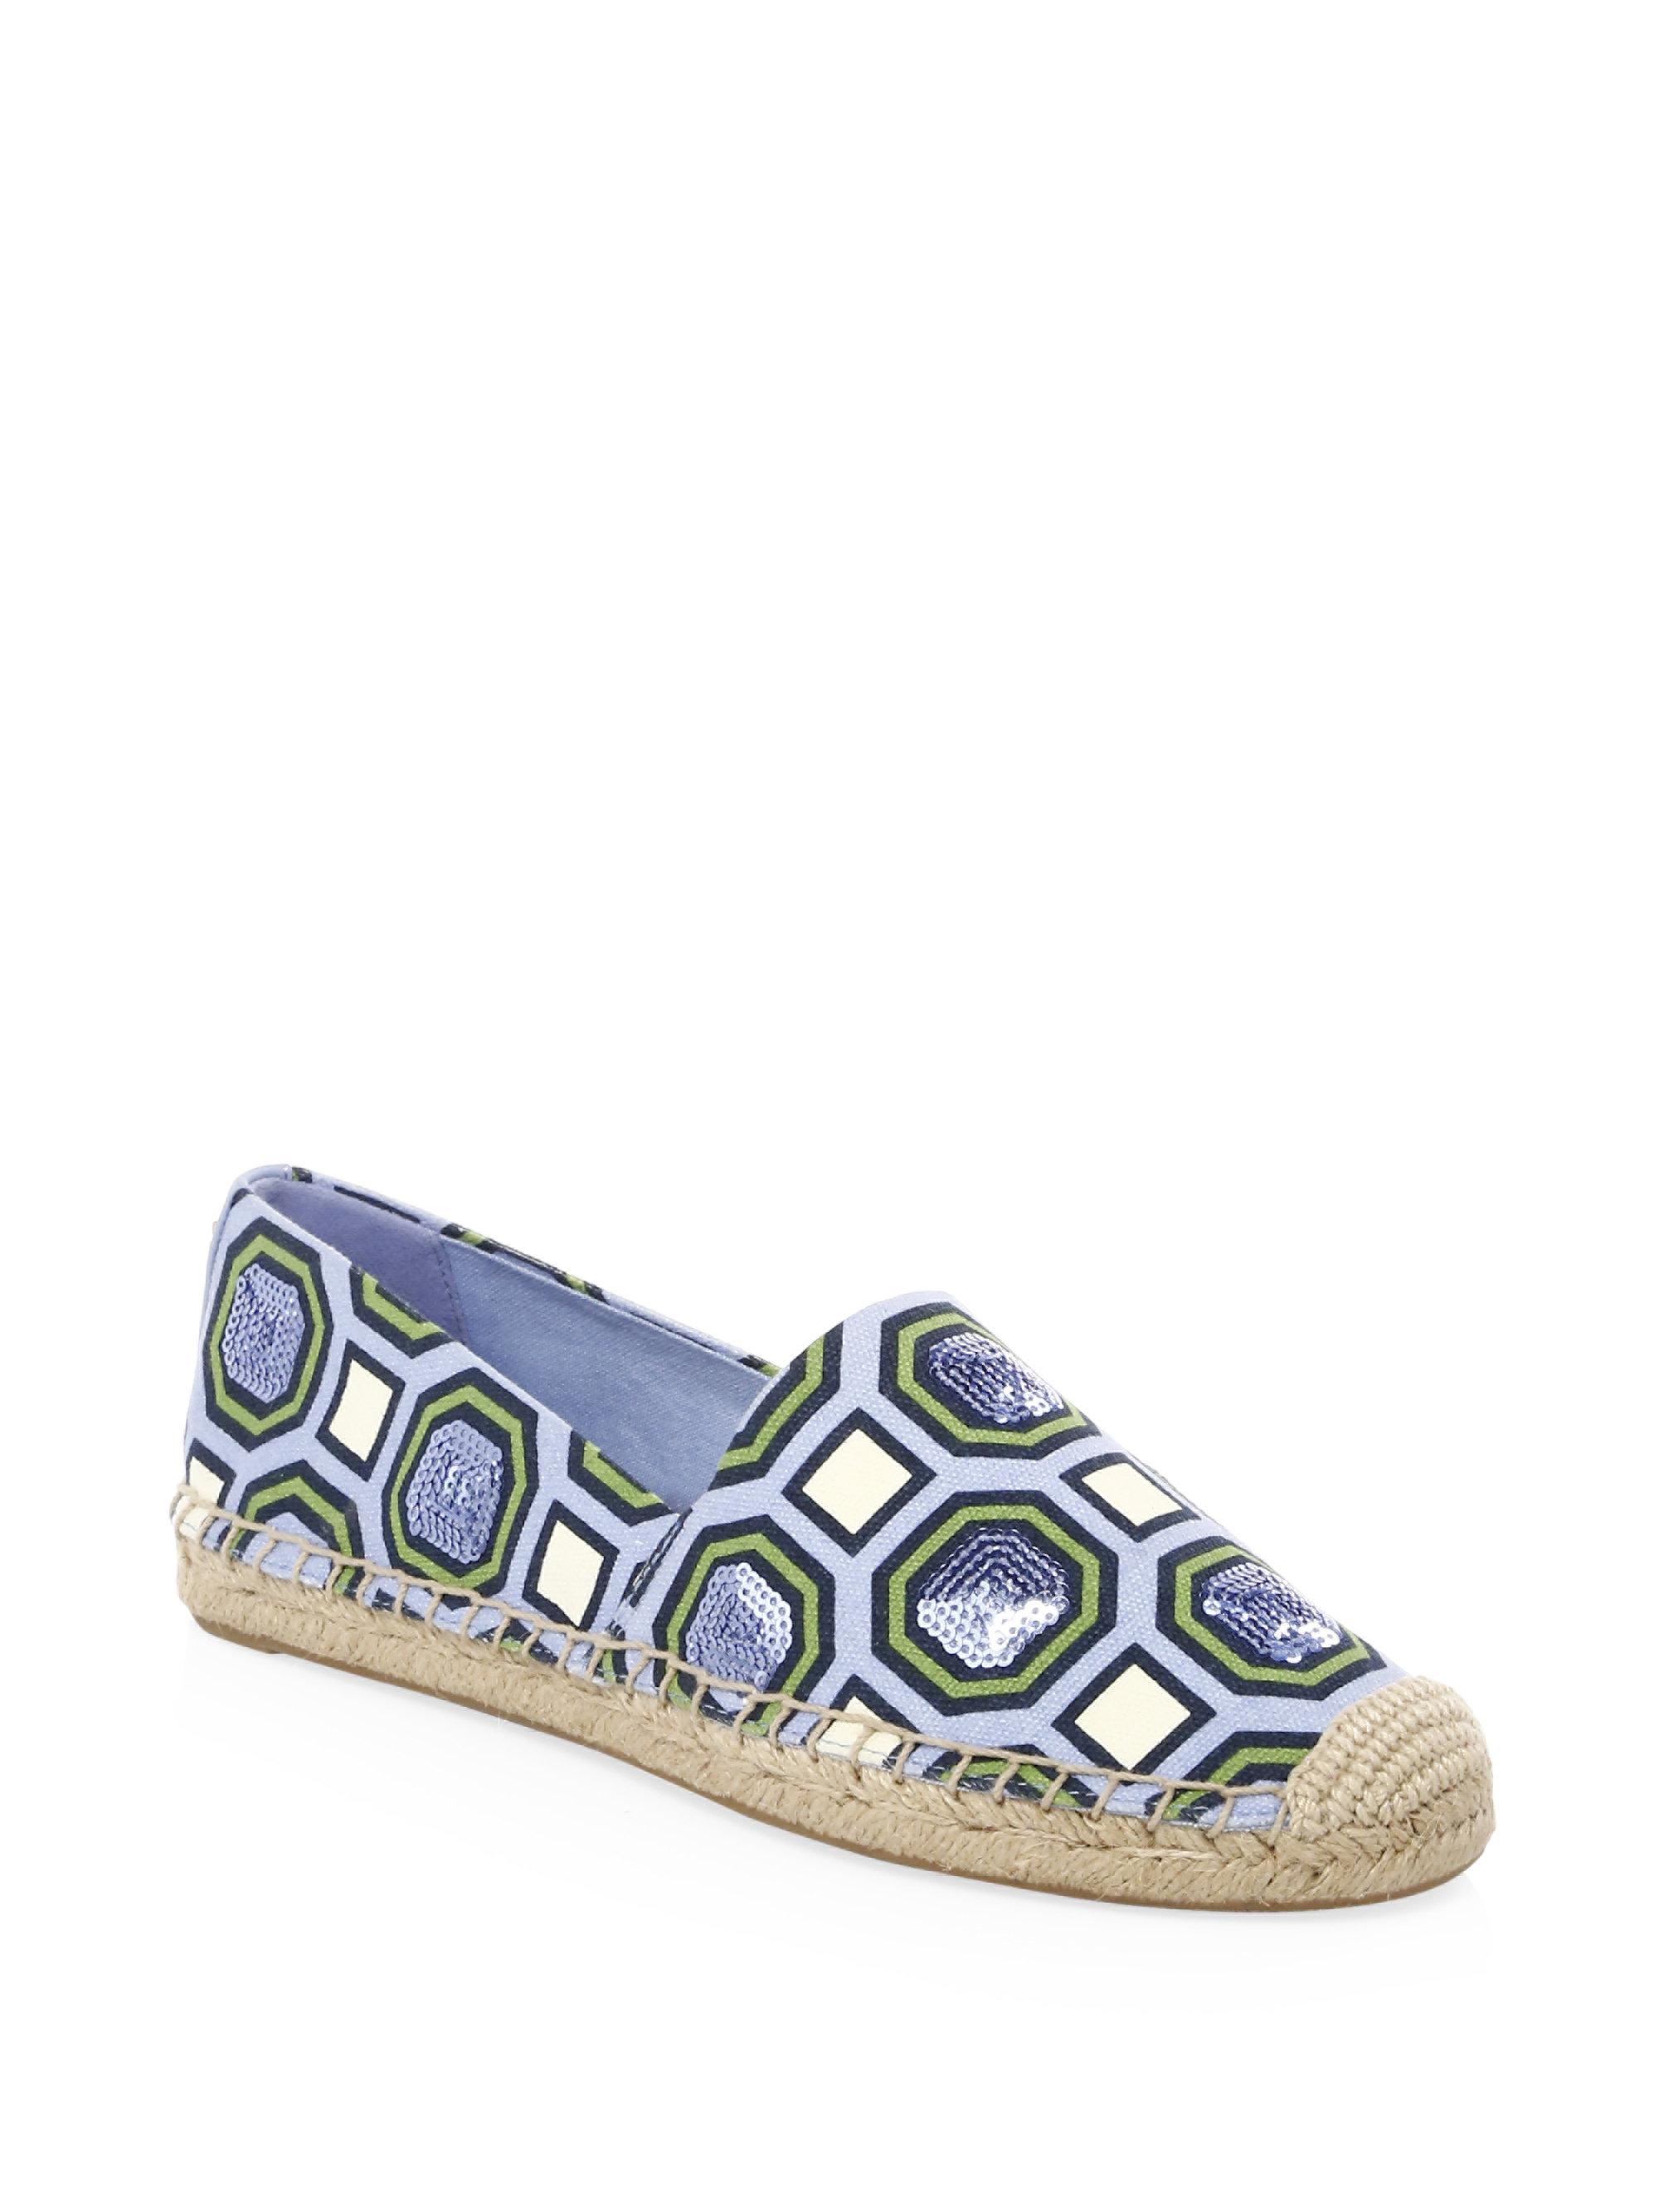 Tory Burch Canvas Cecily Embellished Espadrilles in Light Chambray ...